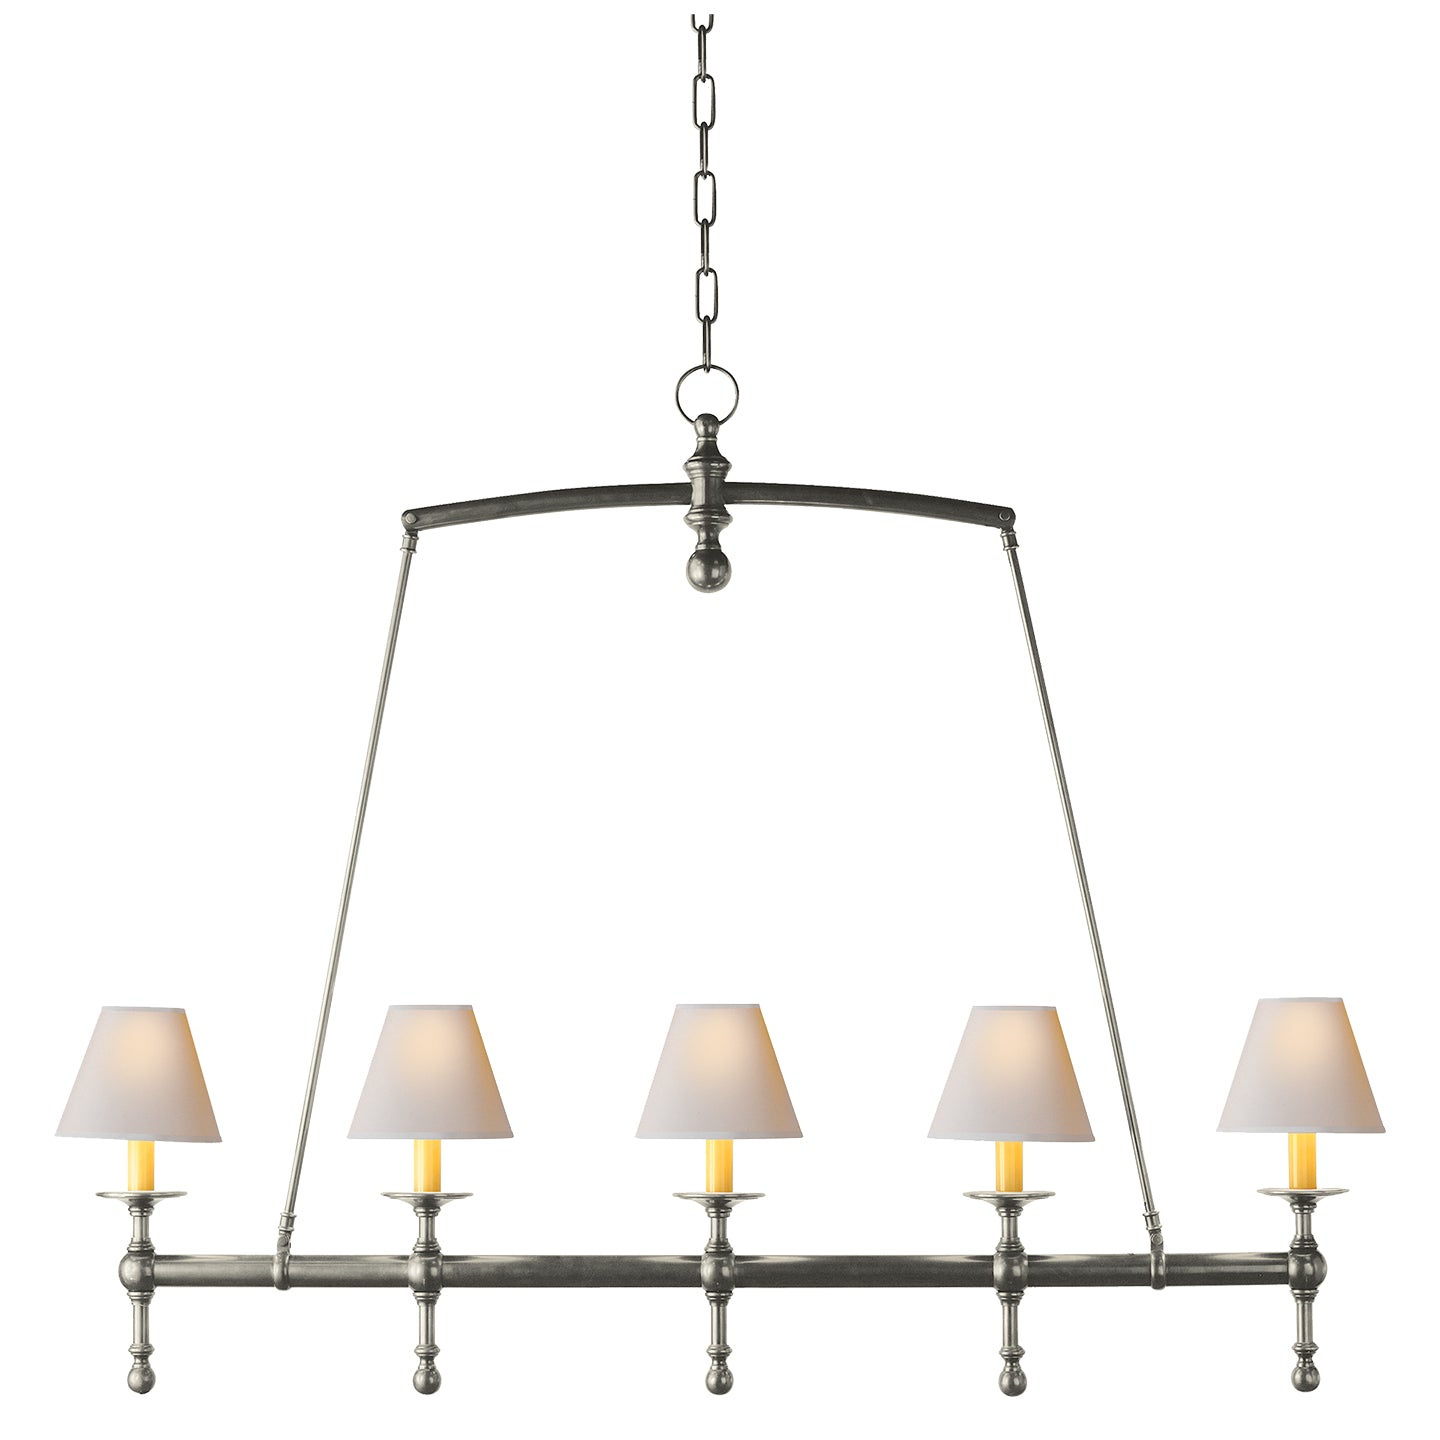 Load image into Gallery viewer, Visual Comfort Signature - SL 5811AN-NP - Five Light Linear Chandelier - Classic - Antique Nickel
